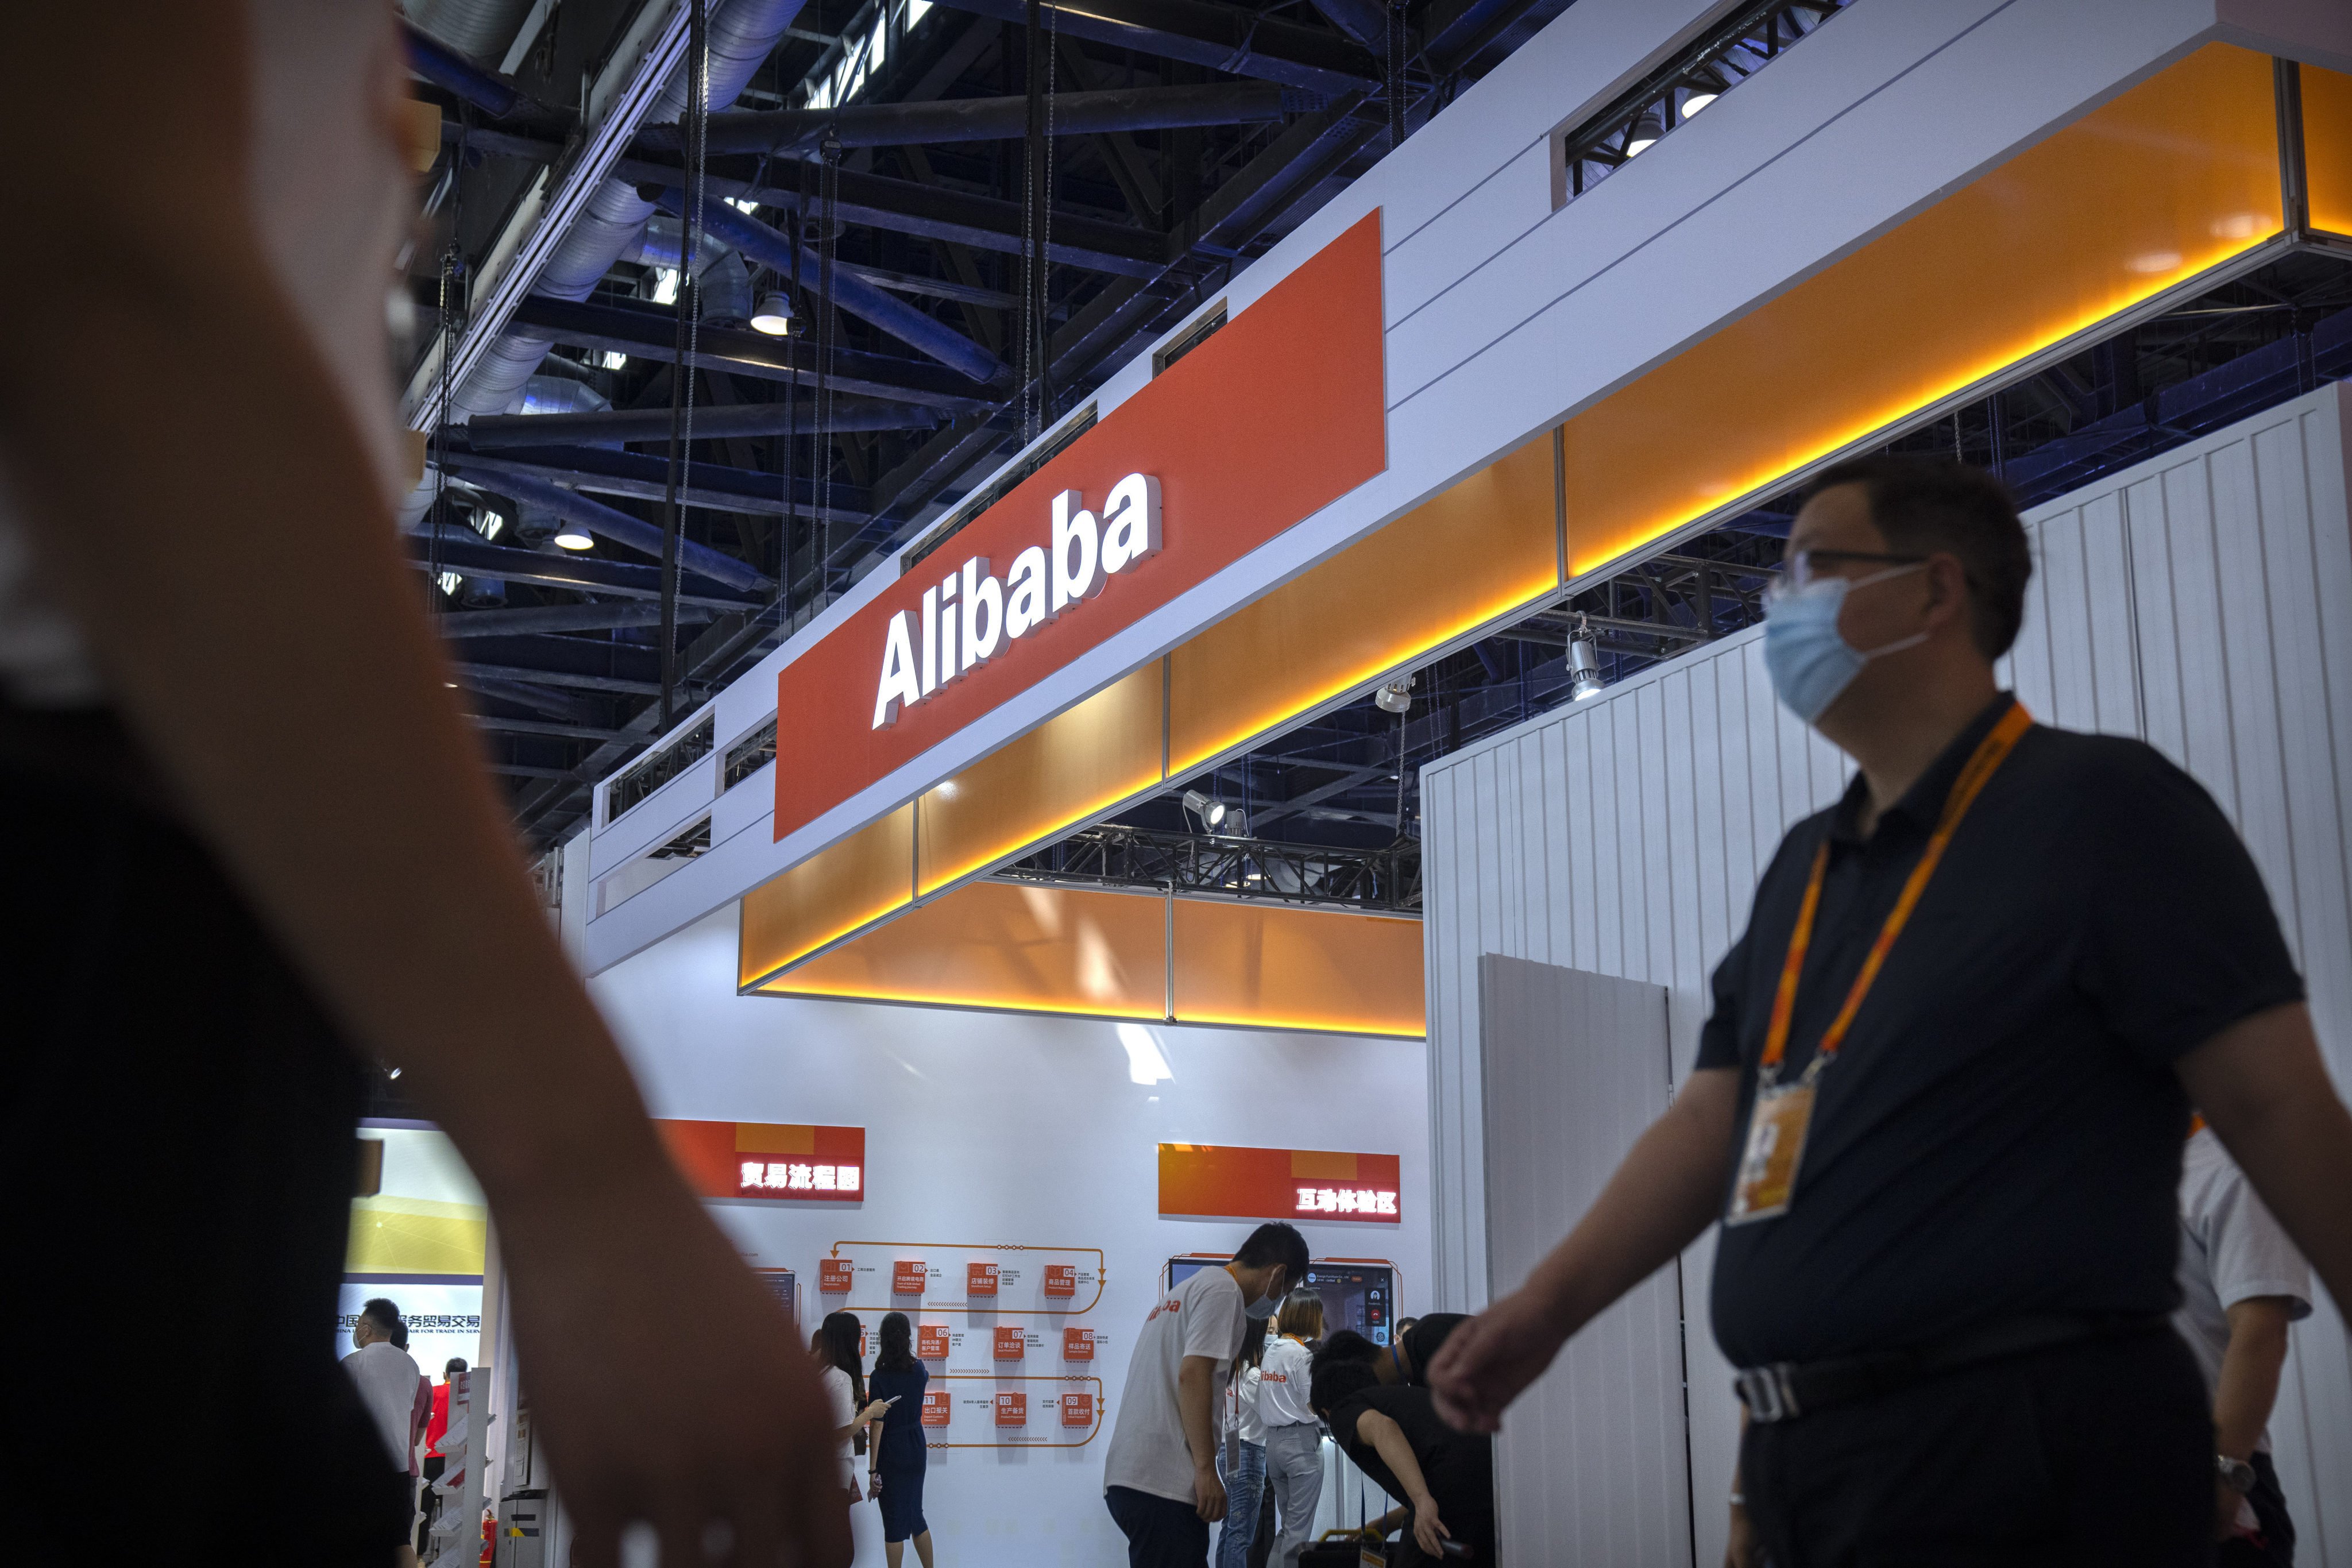 Visitors walk past a booth for Alibaba at the China International Fair for Trade in Services (CIFTIS) in Beijing, Sept. 3, 2021. Photo: AP